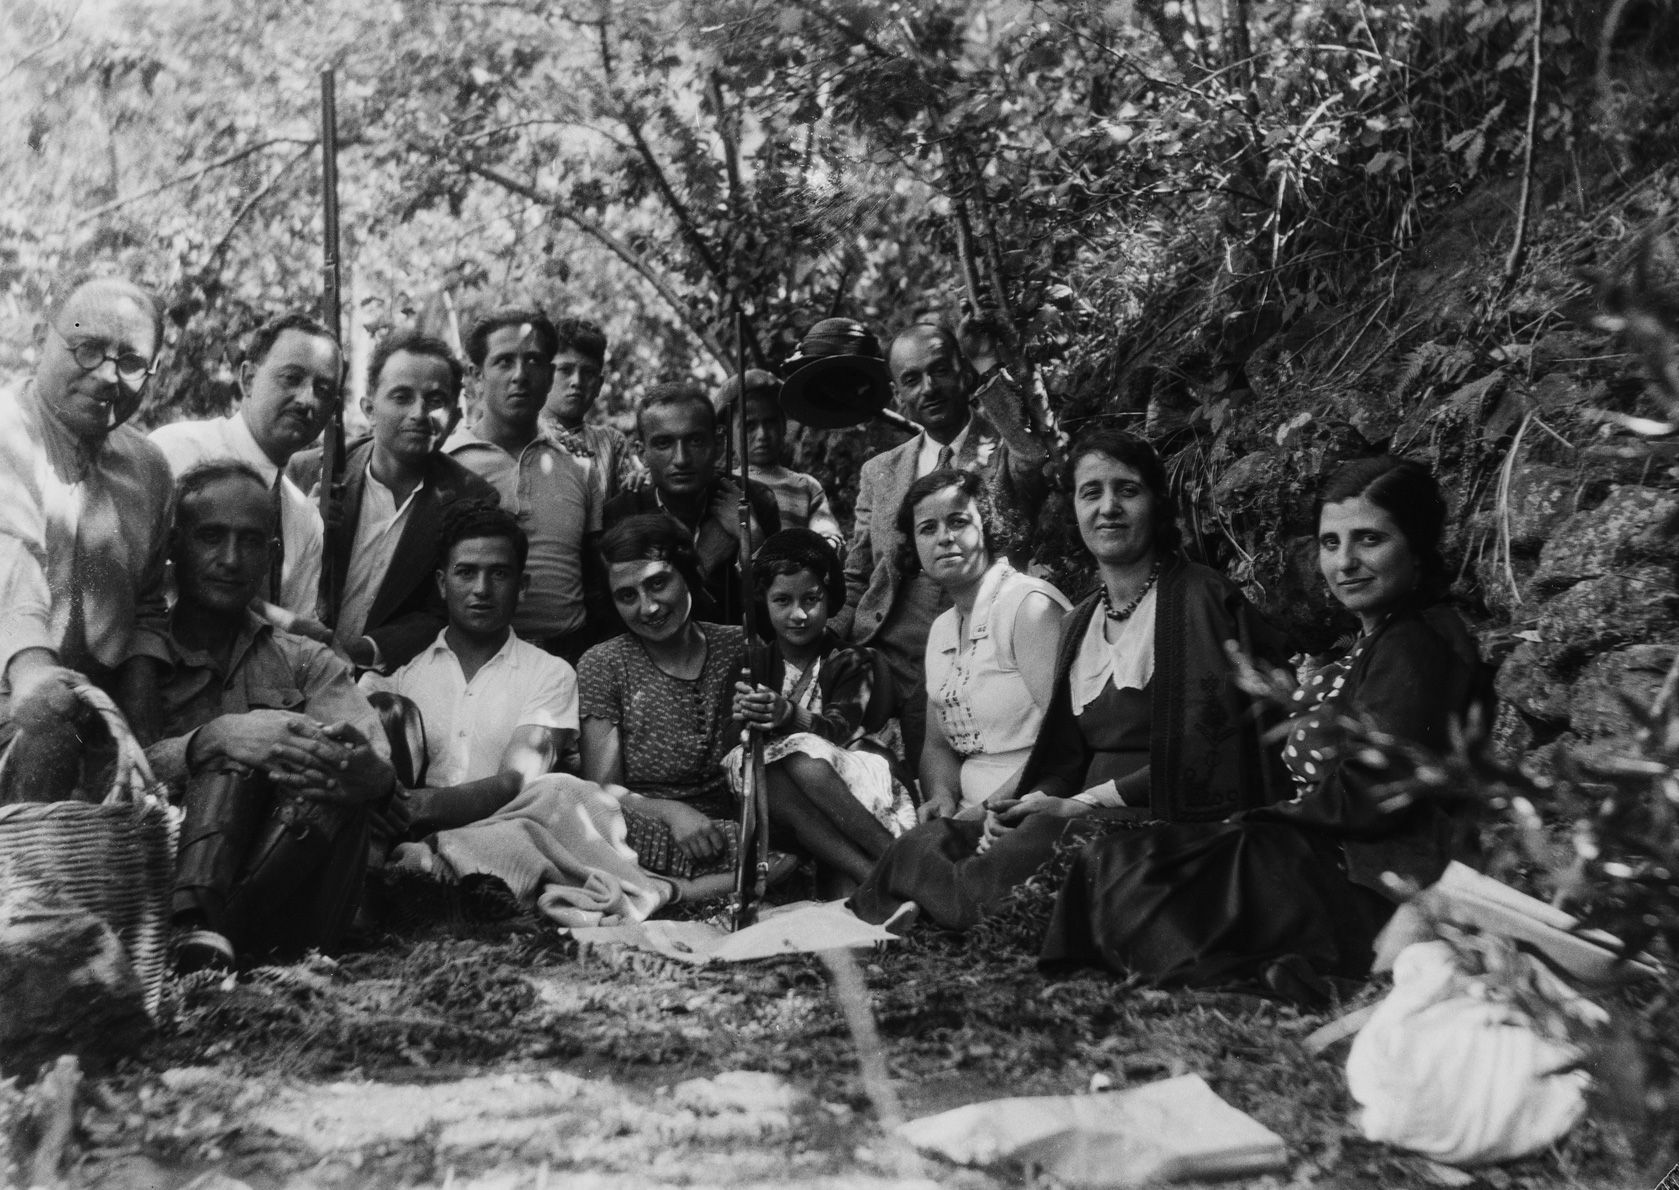 Outdoor group portrait. Taken by Jibrail Jabbur in Syria in the mid-20th century. Gelatin silver negative on cellulose acetate film, 8.6 x 12.3 cm. 0083ja00057, 0083ja ­– Norma Jabbur collection, courtesy of the Arab Image Foundation, Beirut.